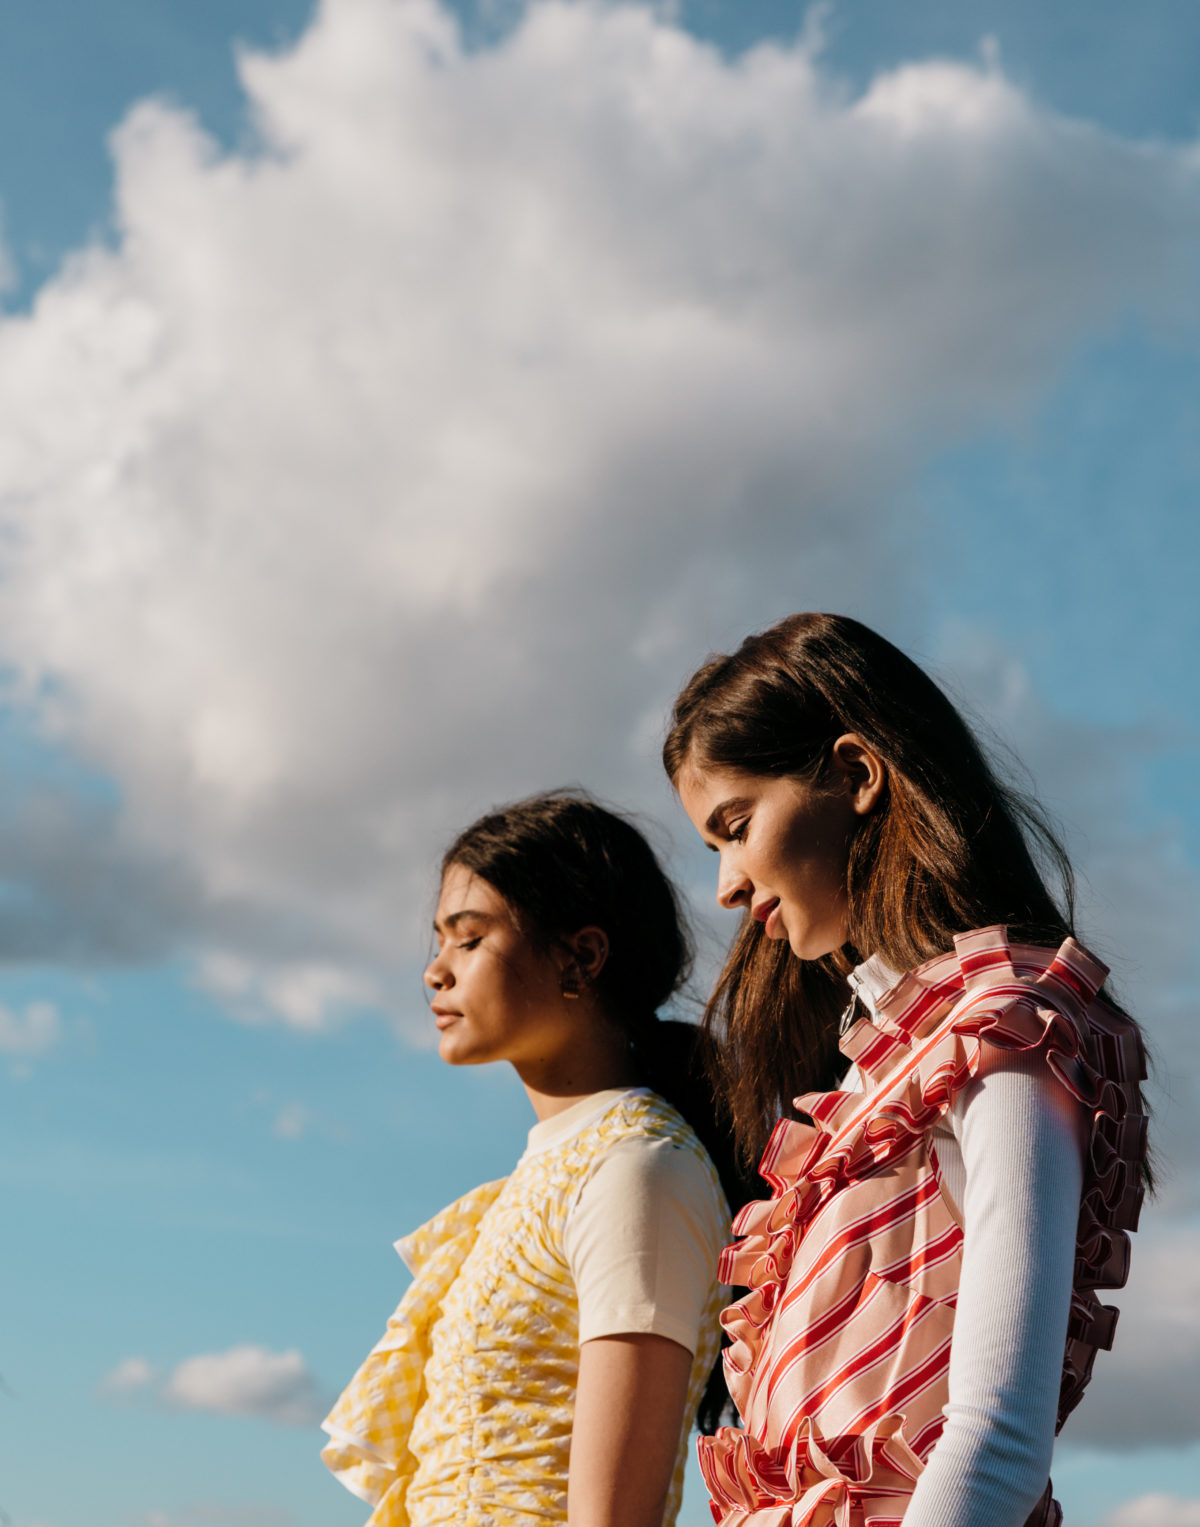 An upclose photo of two women dressed in high fashion outdoors